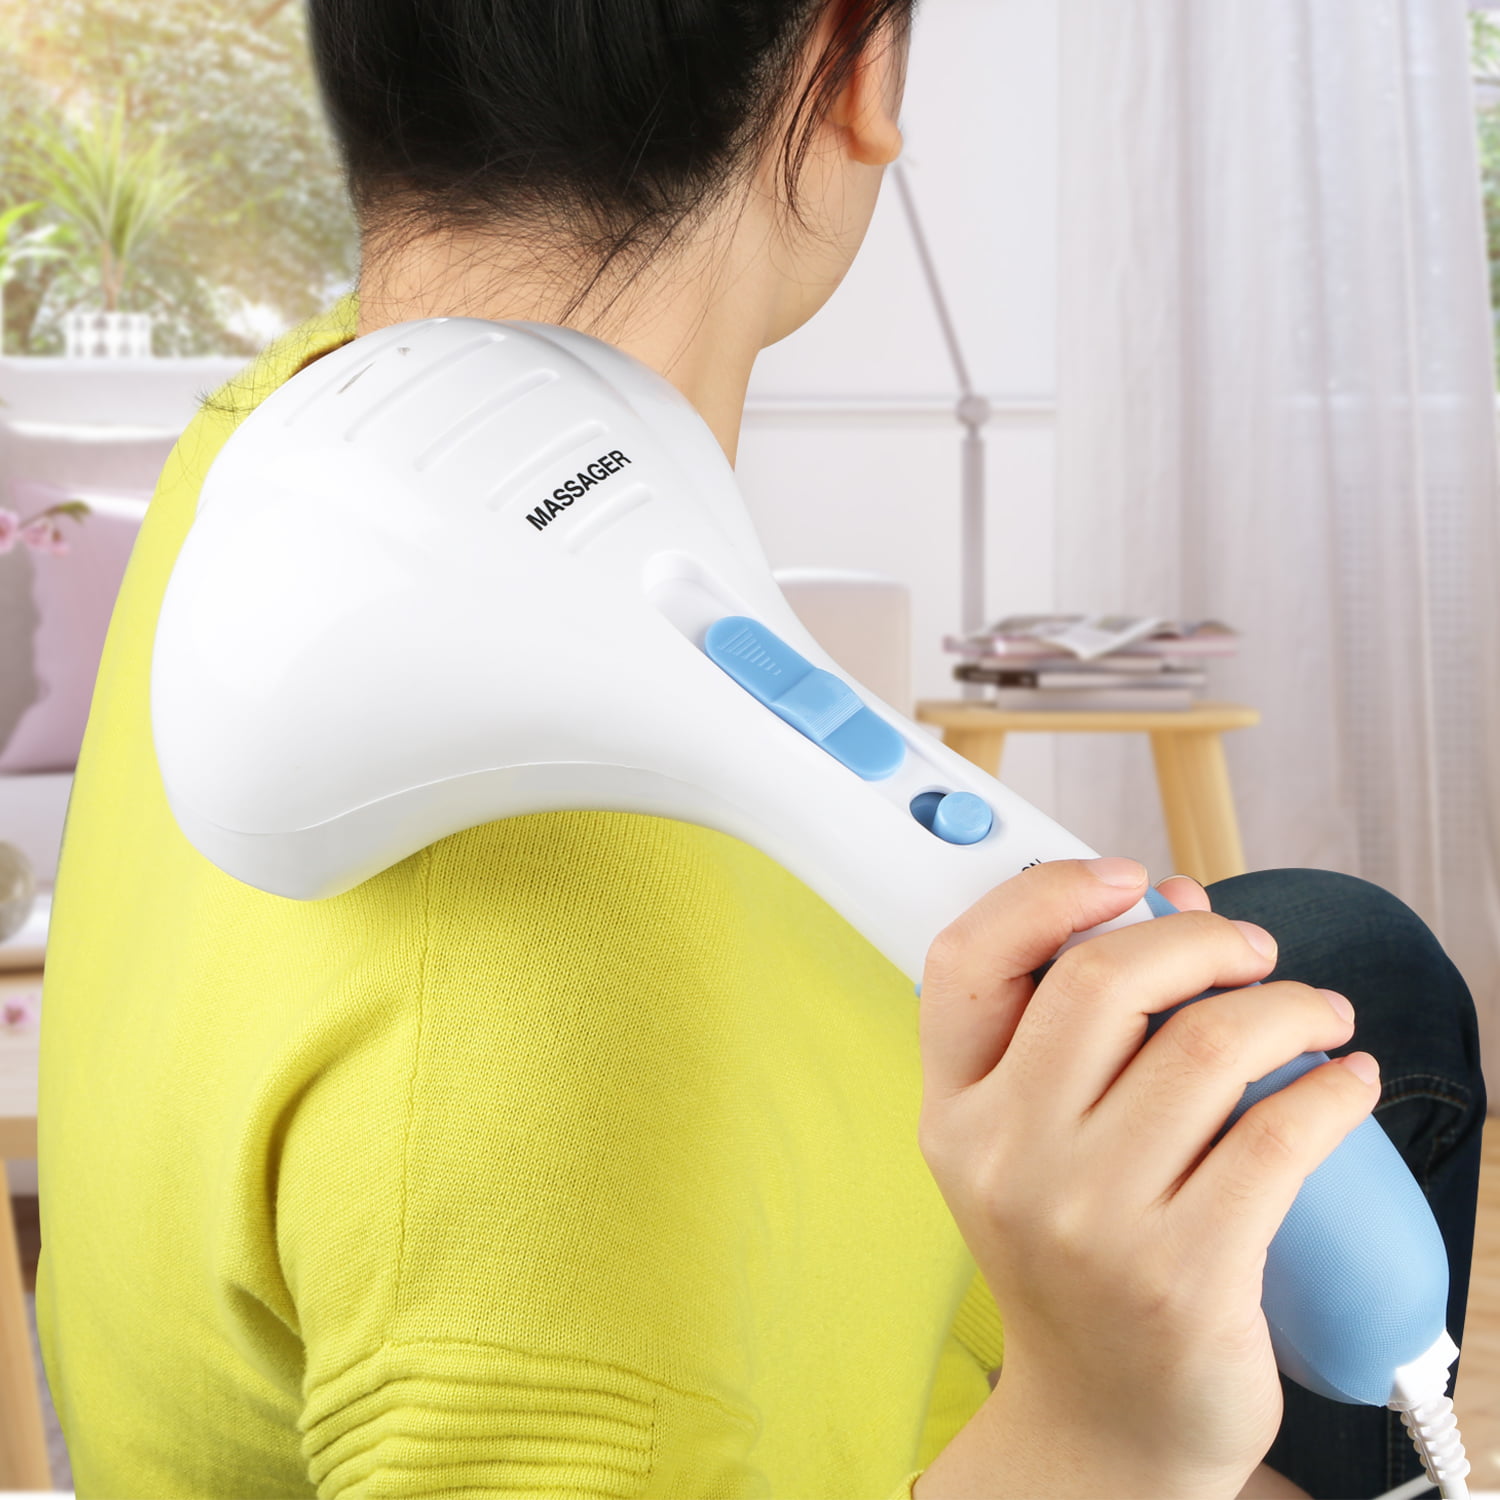 Dropship Electric Massager Handheld Full Body Percussion Massager Double  Head Vibrating Body Relax to Sell Online at a Lower Price